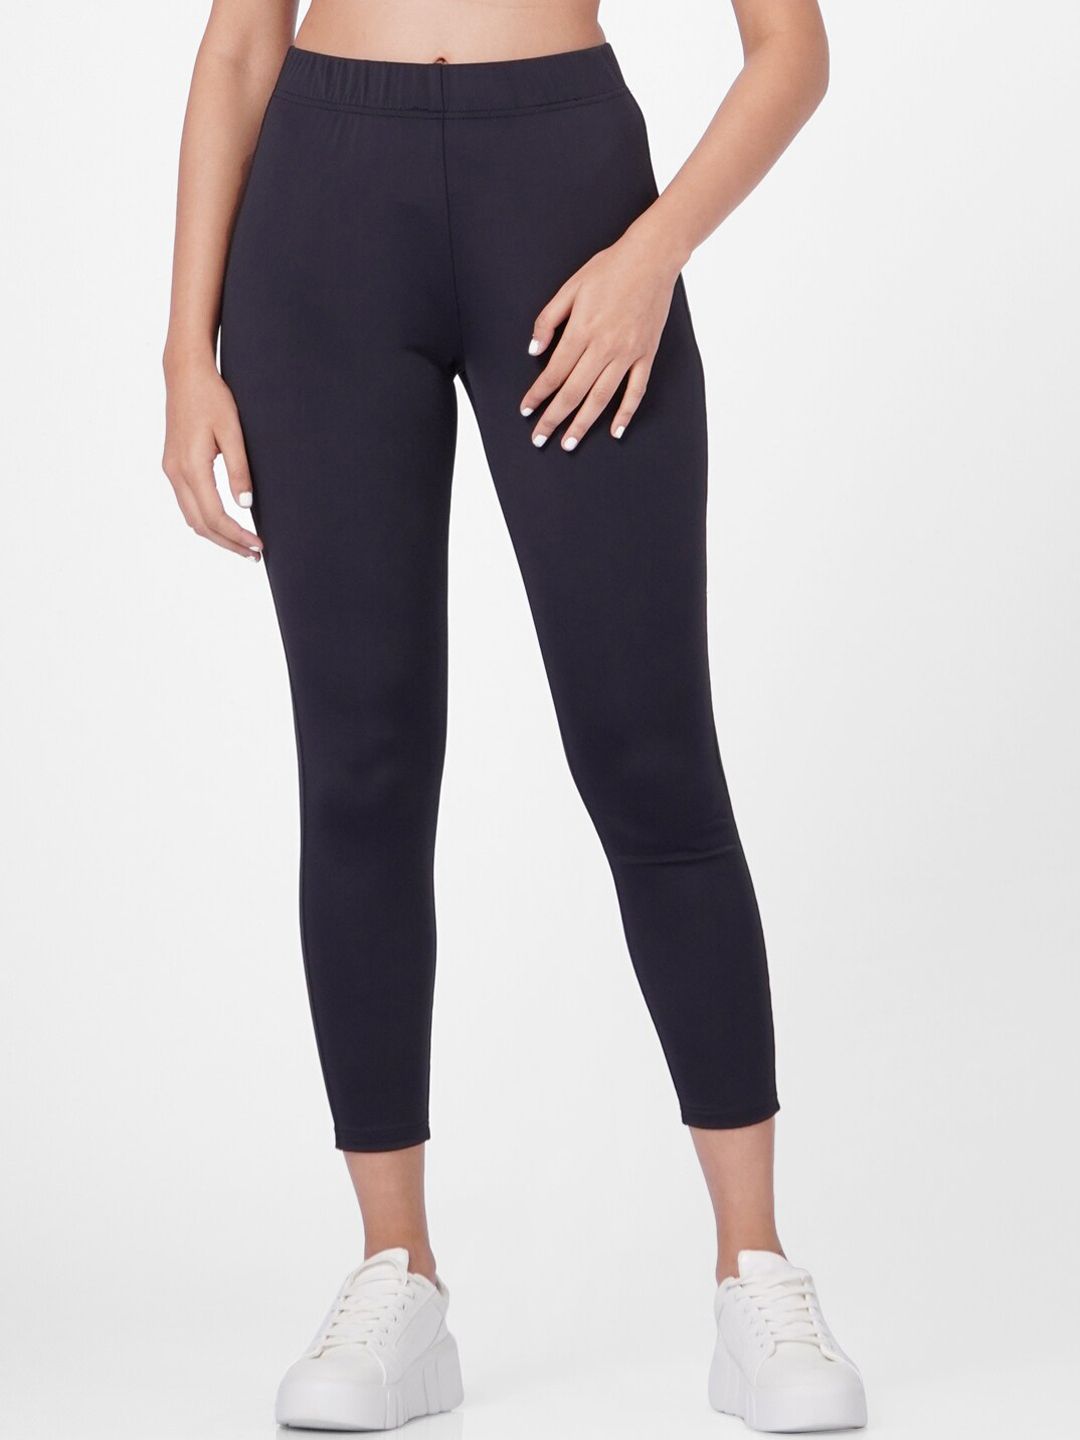 ONLY Women Black Solid Cropped ONLSPORTIF Tights Price in India